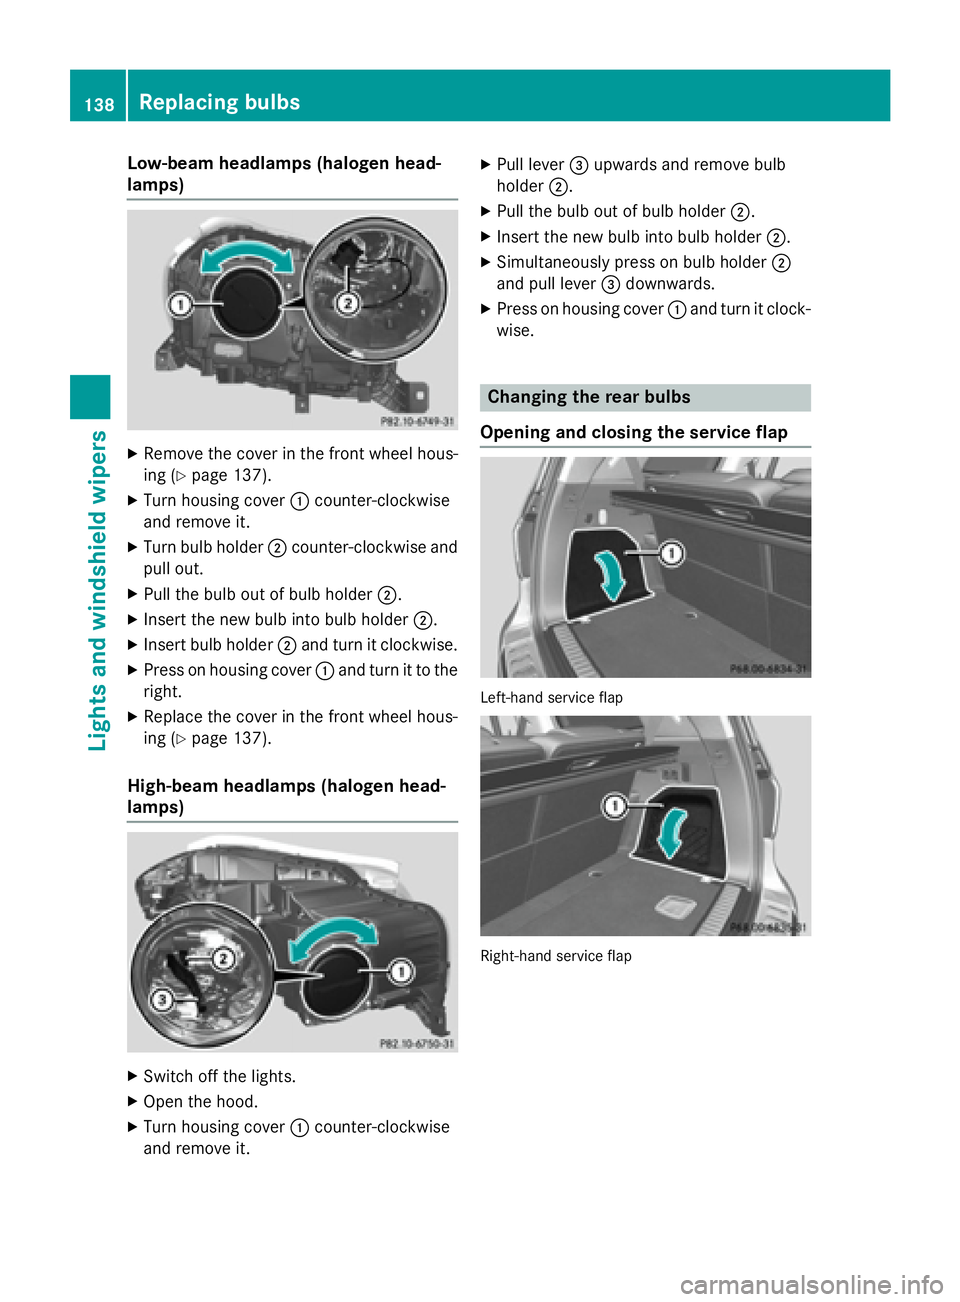 MERCEDES-BENZ GL 2016  Owners Manual Low-beam headlamps (halogen head-
lamps) X
Remove the cover in the front wheel hous-
ing ( Y
page 137).X
Turn housing cover �C counter-clockwise
and remove it. X
Turn bulb holder �D counter-clockwise 